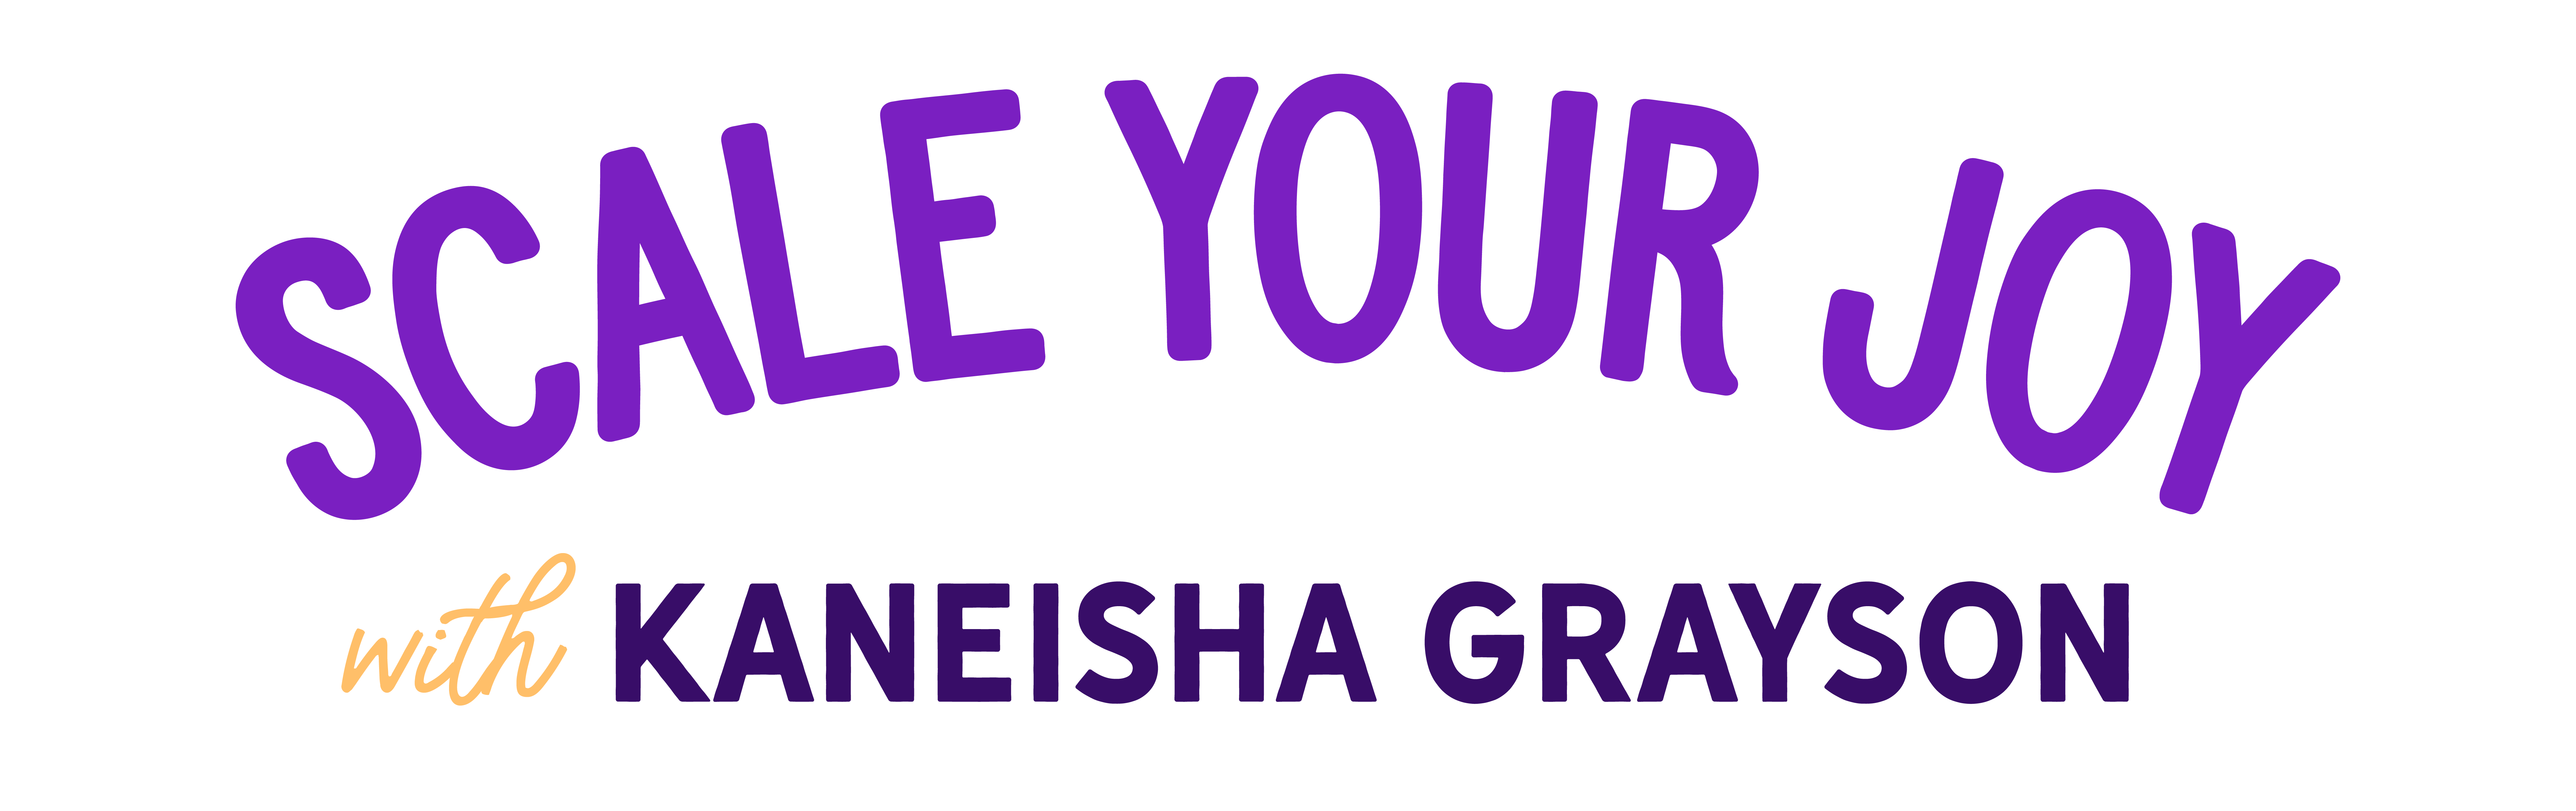 Logo with text saying Scale Your Joy with Kaneisha Grayson